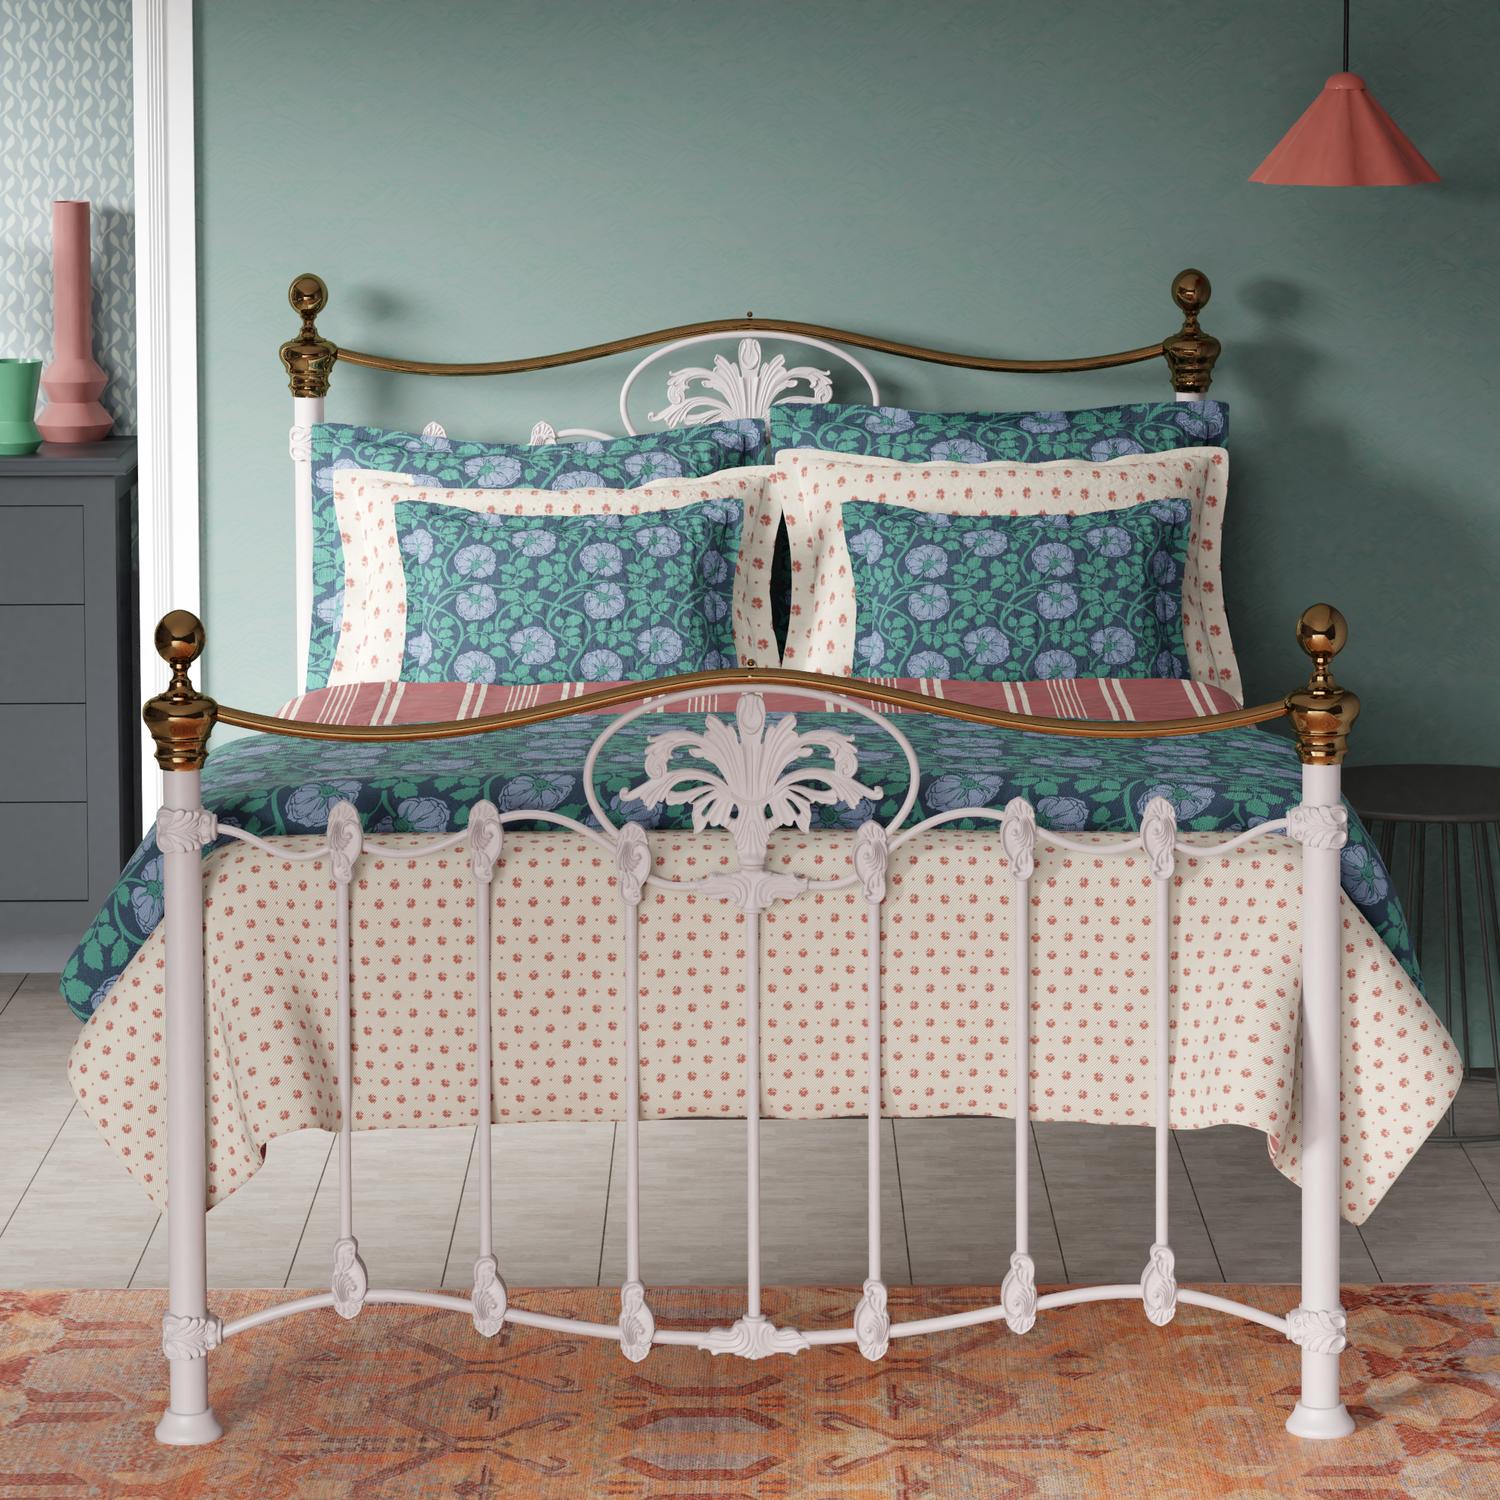 Camolin iron bed - Image teal bedroom